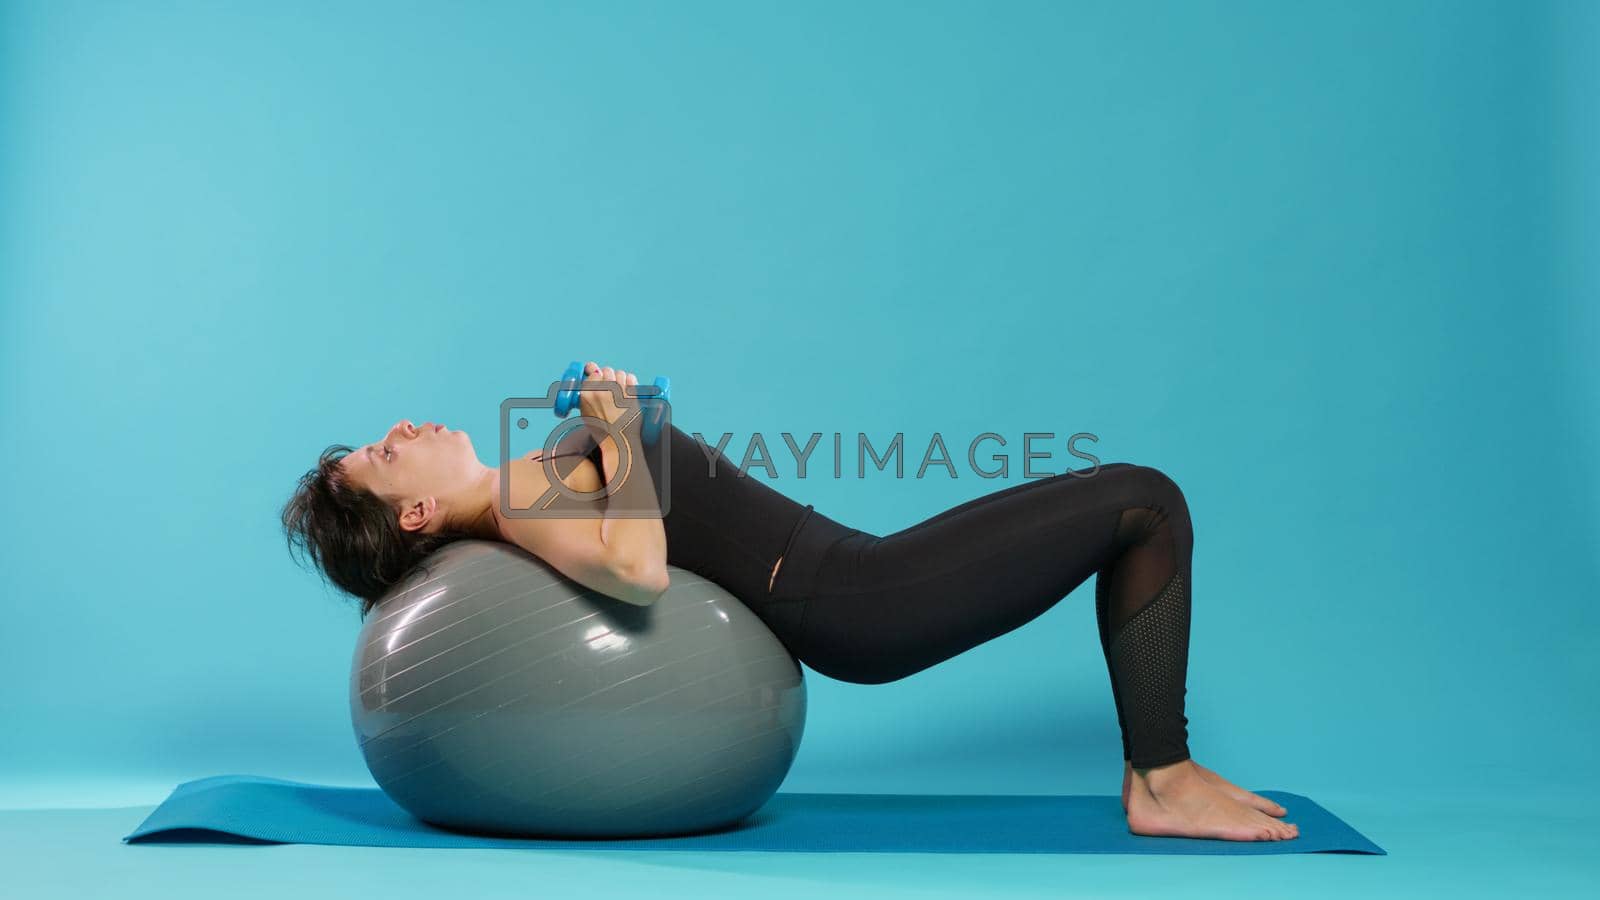 Active woman lifting dumbbells on fitness toning ball, doing physical exercise to train muscles in studio. Young adult using workout equipment and weights to practice sport and wellbeing.